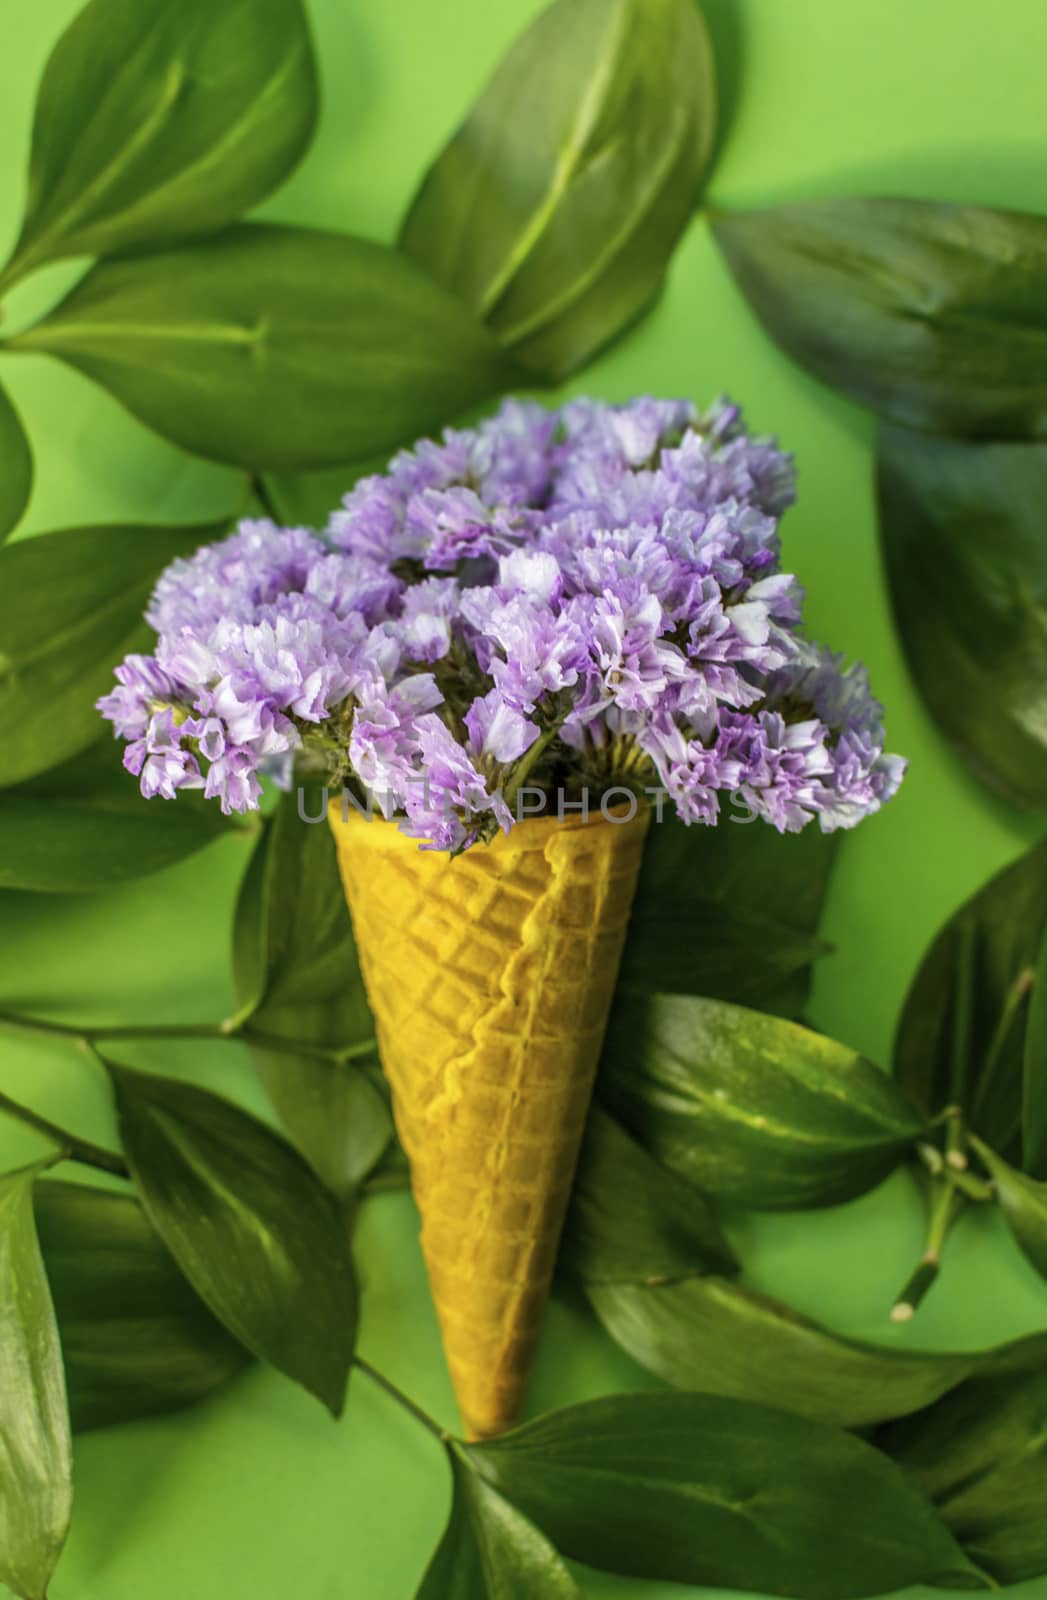 Waffle cone with violet flowers with leaves on green background